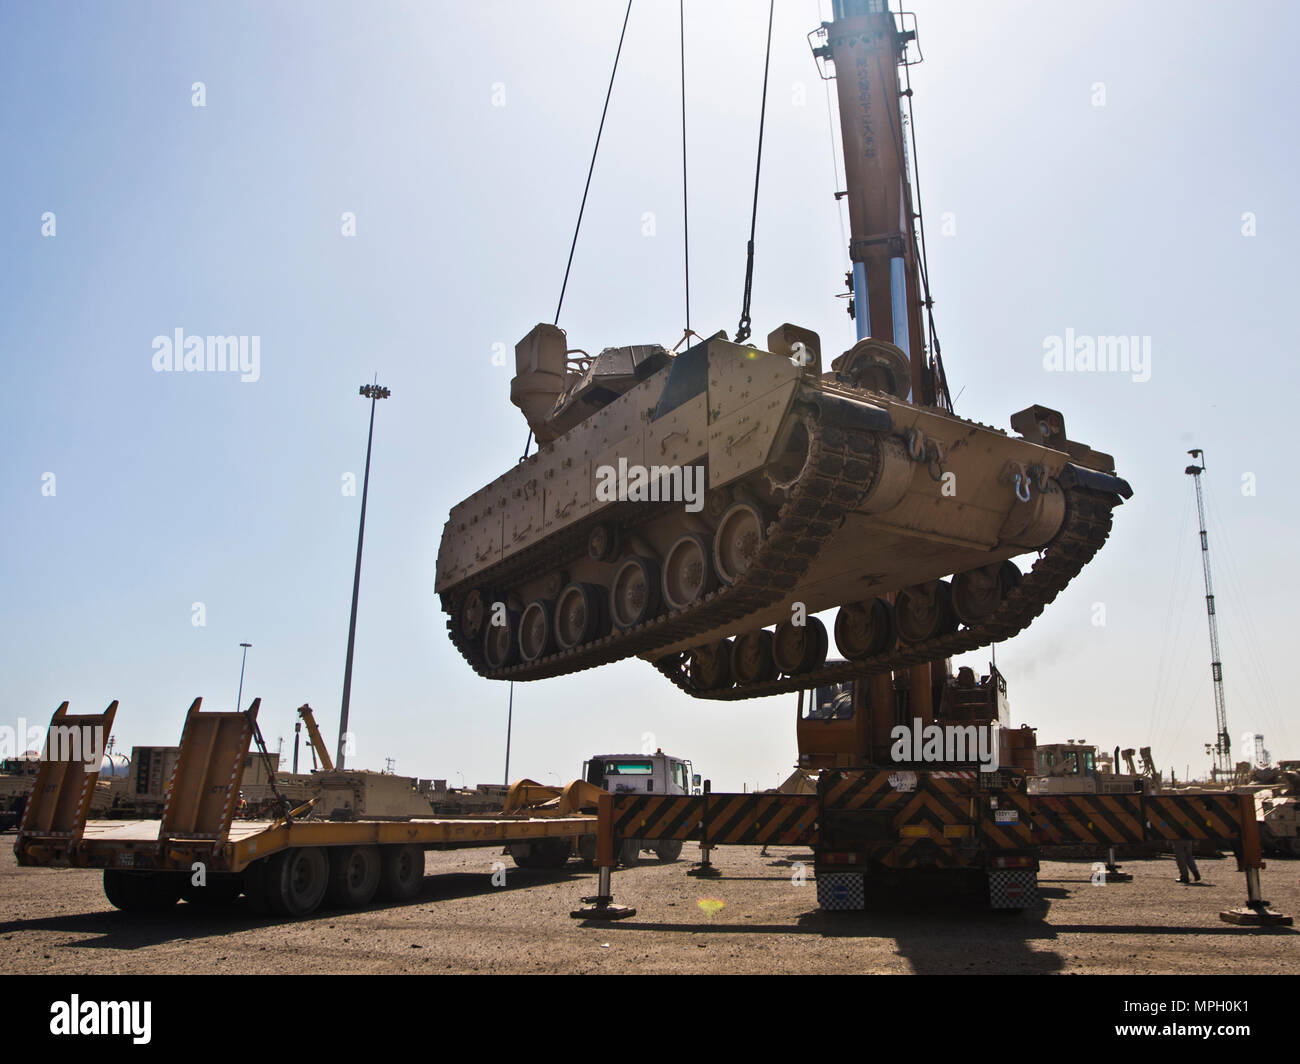 A M2/M3 Bradley Fighting Vehicle is transported via crane onto a flat bed truck to be put on the USNS Mendonca at Shuaiba Port, Kuwait, on Feb. 28, 2017. The Mendonca is used to import and export U.S. Military vehicles in support of operations in the USCENTCOM AOR. (U.S. Army Photo by Staff Sgt. Dalton Smith) Stock Photo